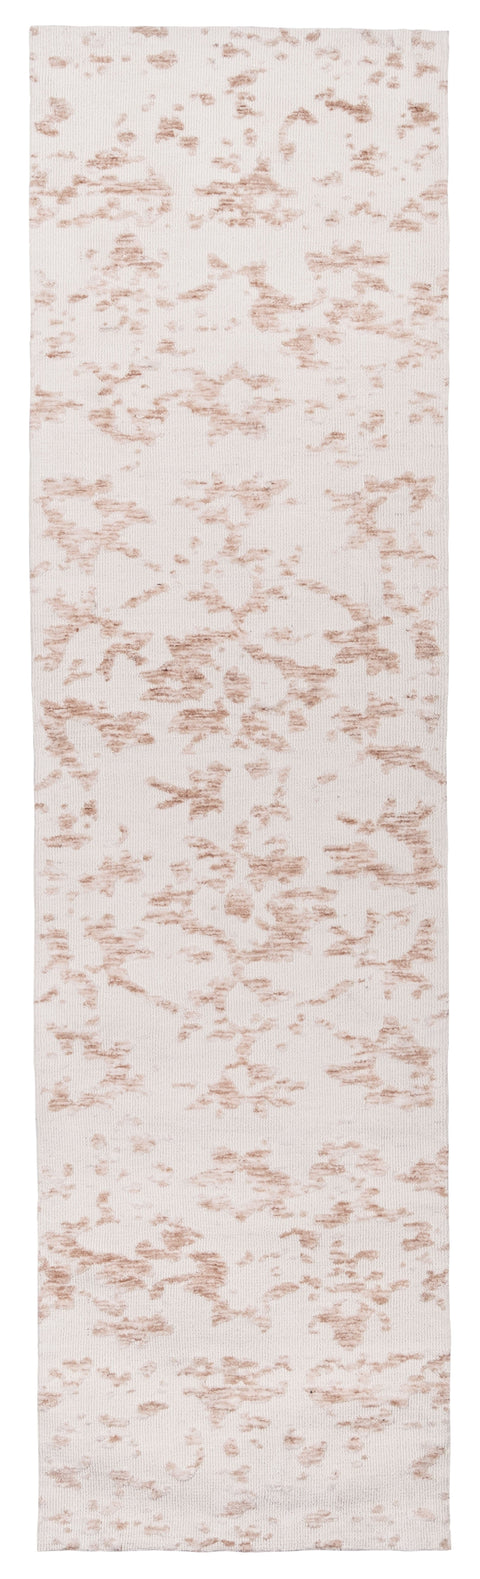 Aria Pink and Ivory Floral Transitional Runner Rug